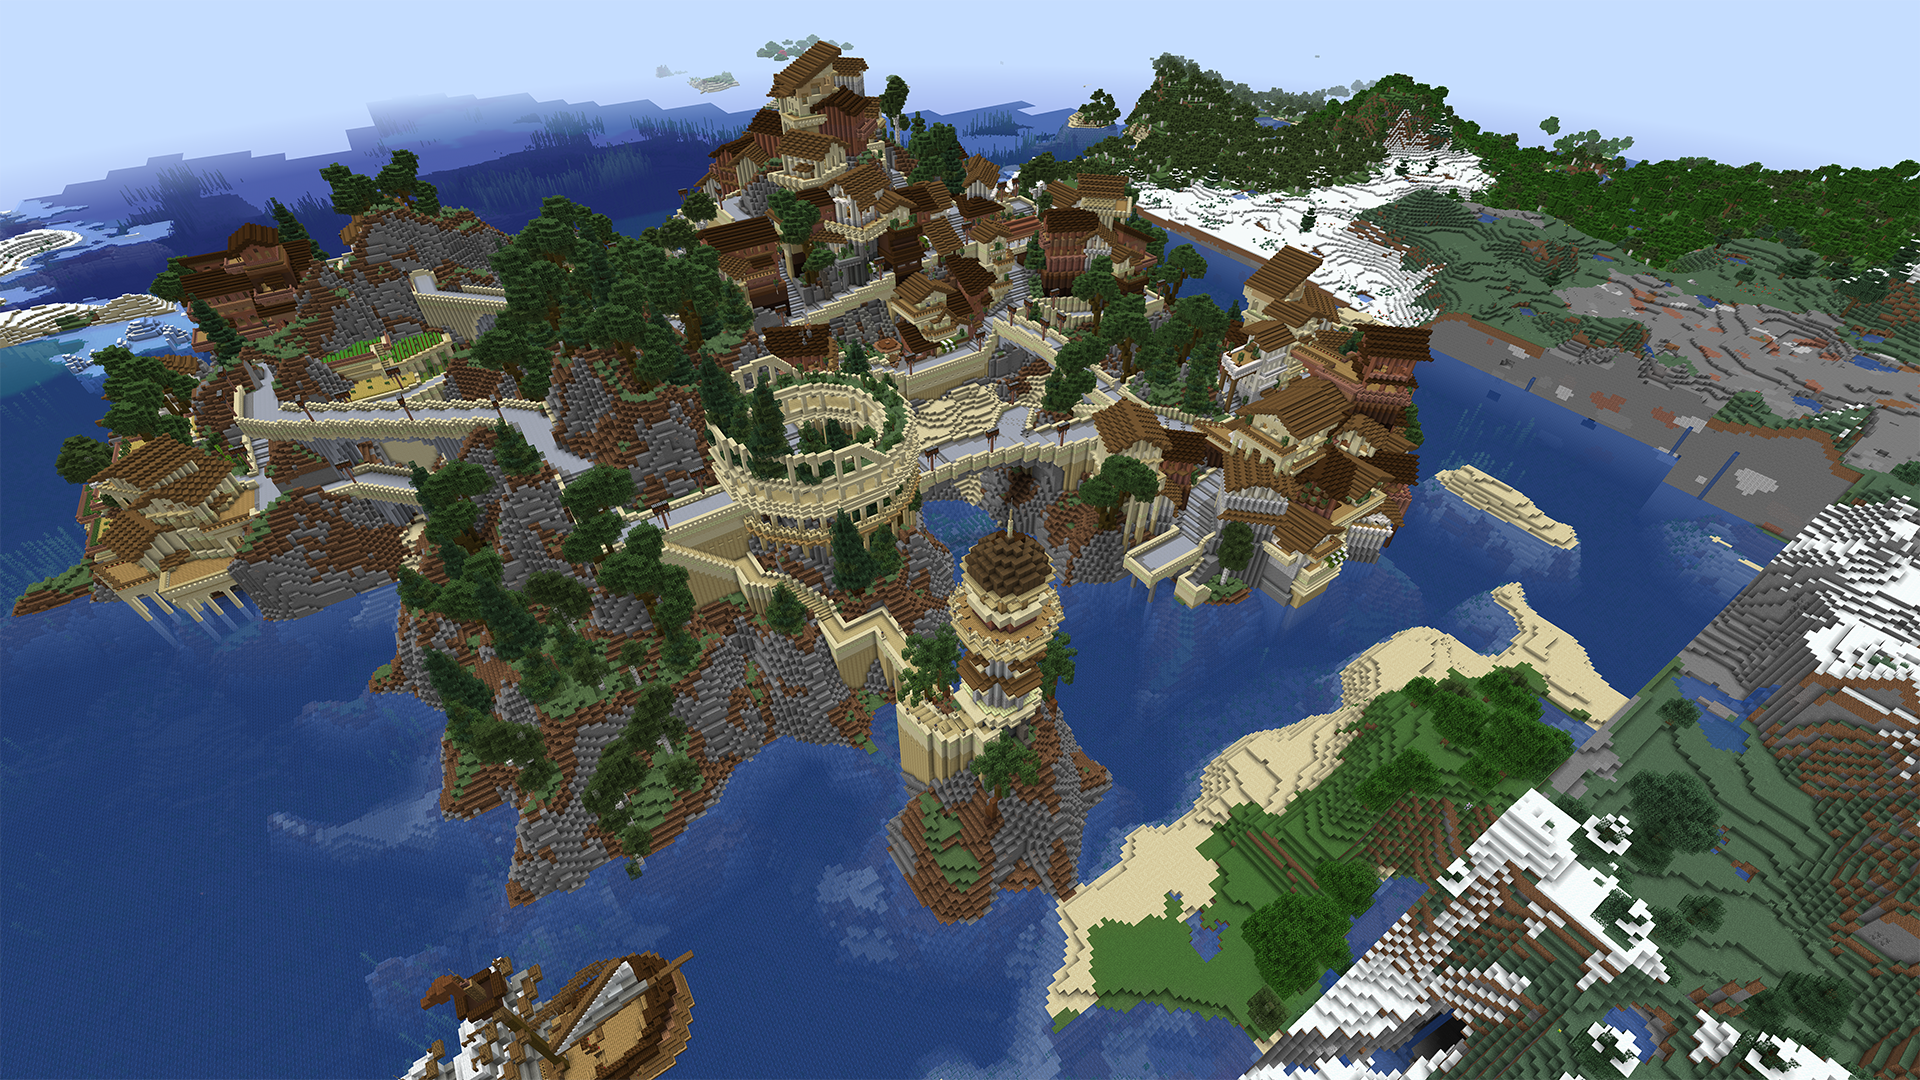 temple run map (3 state parkour) - Maps - Mapping and Modding: Java Edition  - Minecraft Forum - Minecraft Forum